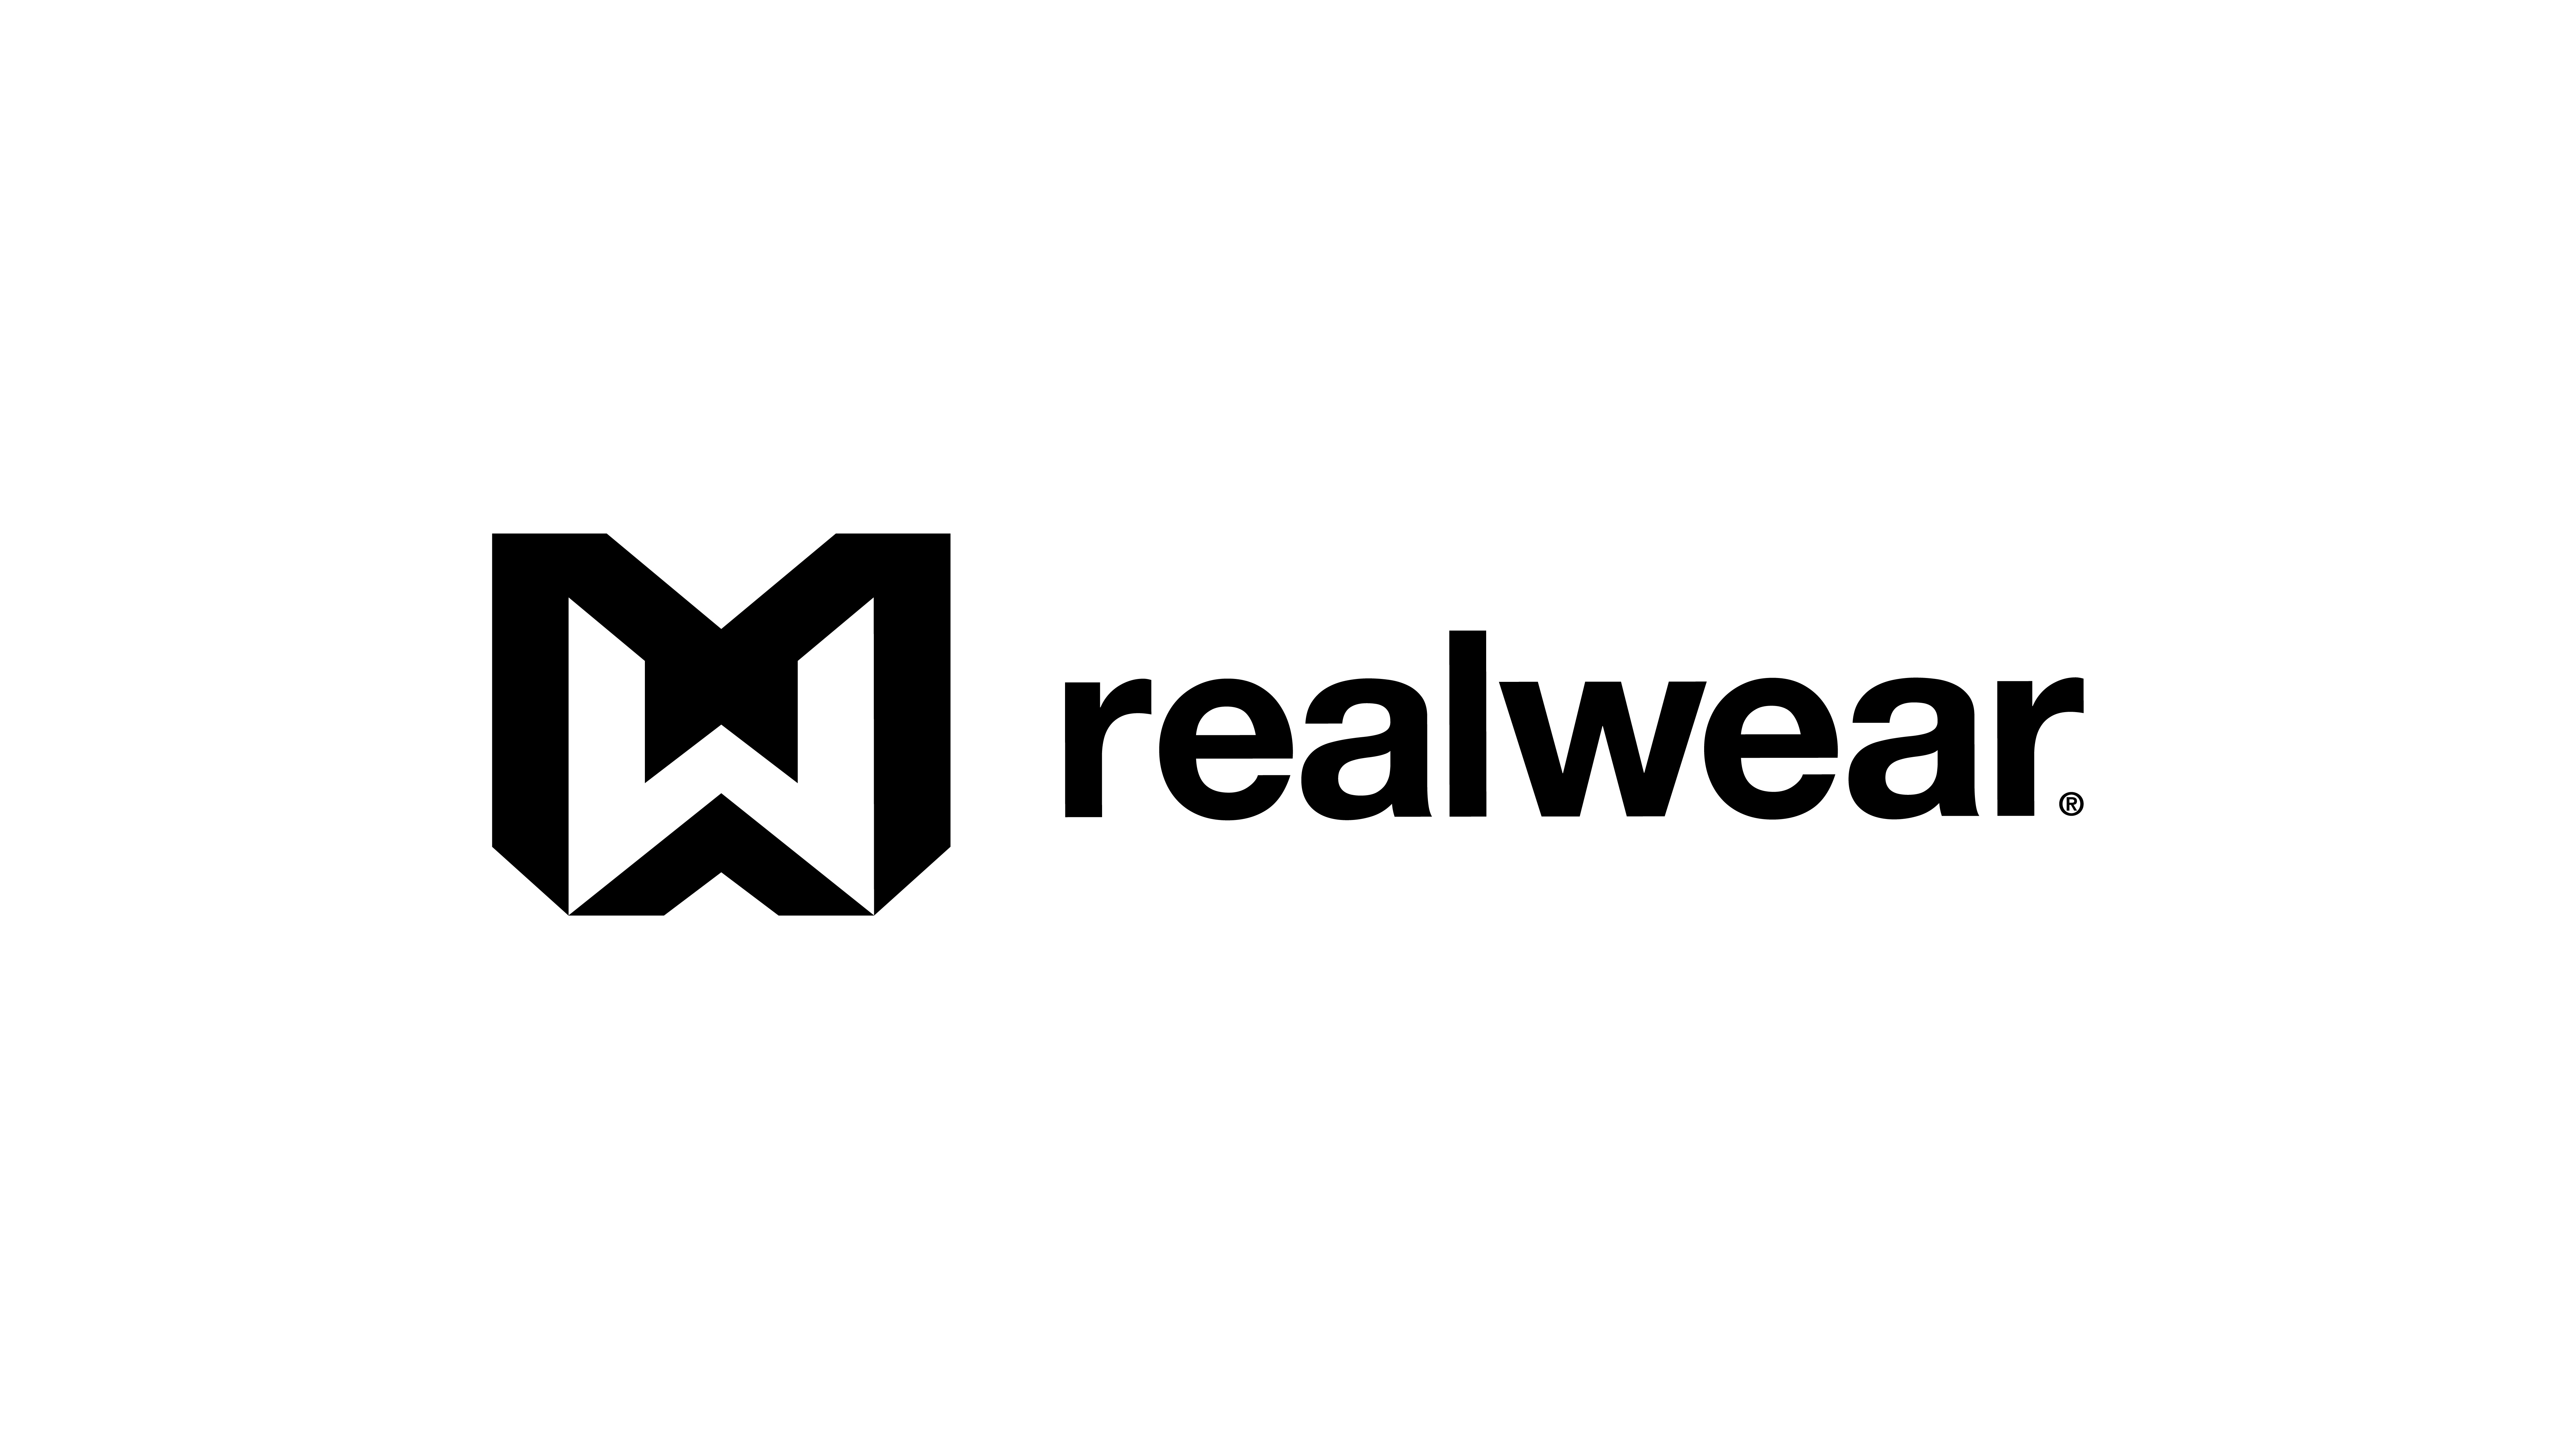 RealWear, Inc. has entered into an agreement to become a publicly traded company via a business combination transaction with Cascadia Acquisition Corp.